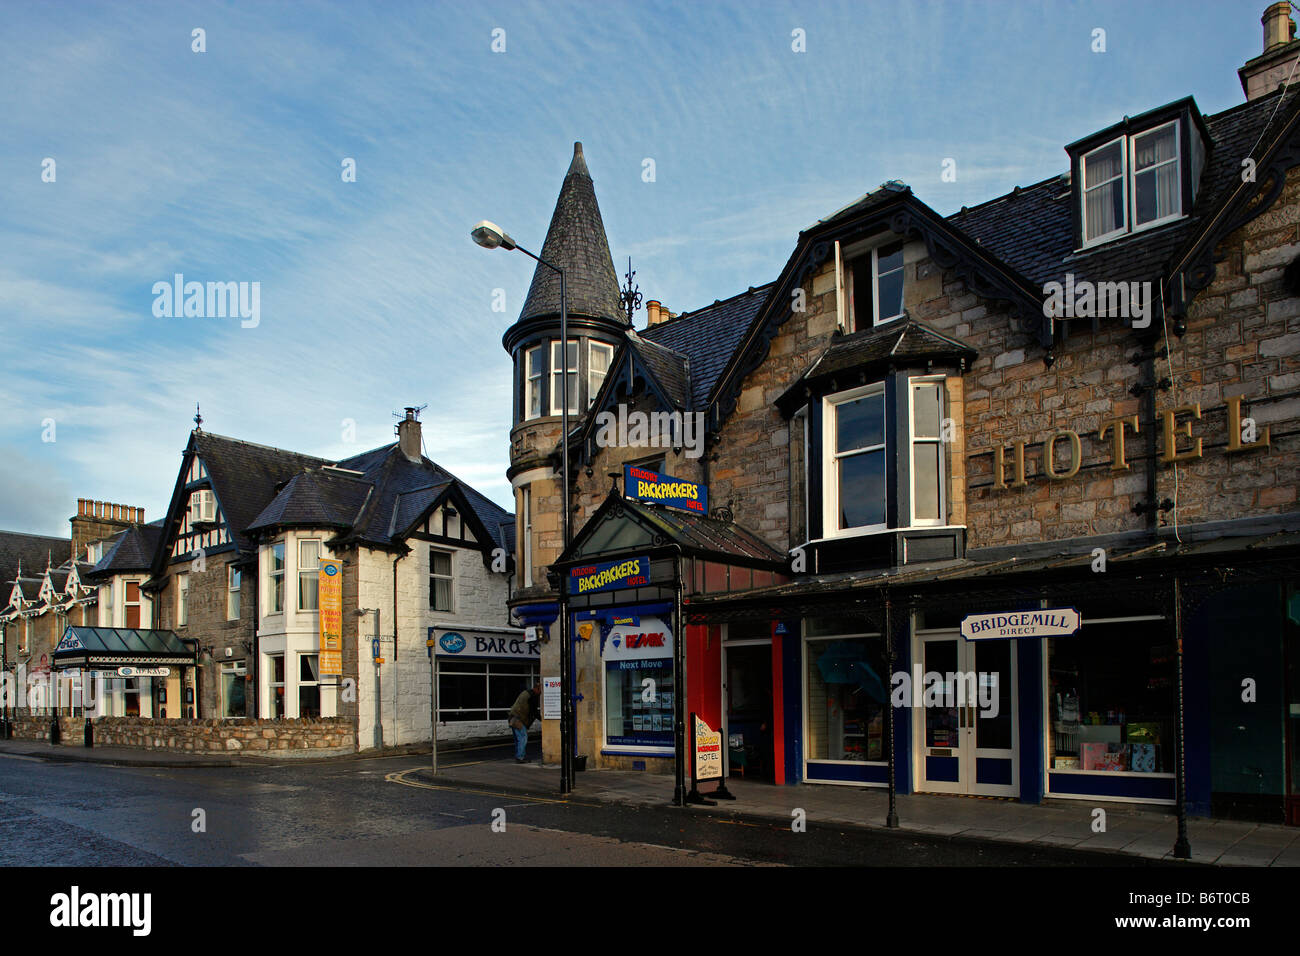 Pitlochry town in Tummel Valley fashonable Spa town in 19th century typical buildings Atholl Rd Perth Kinross Scotland UK Stock Photo